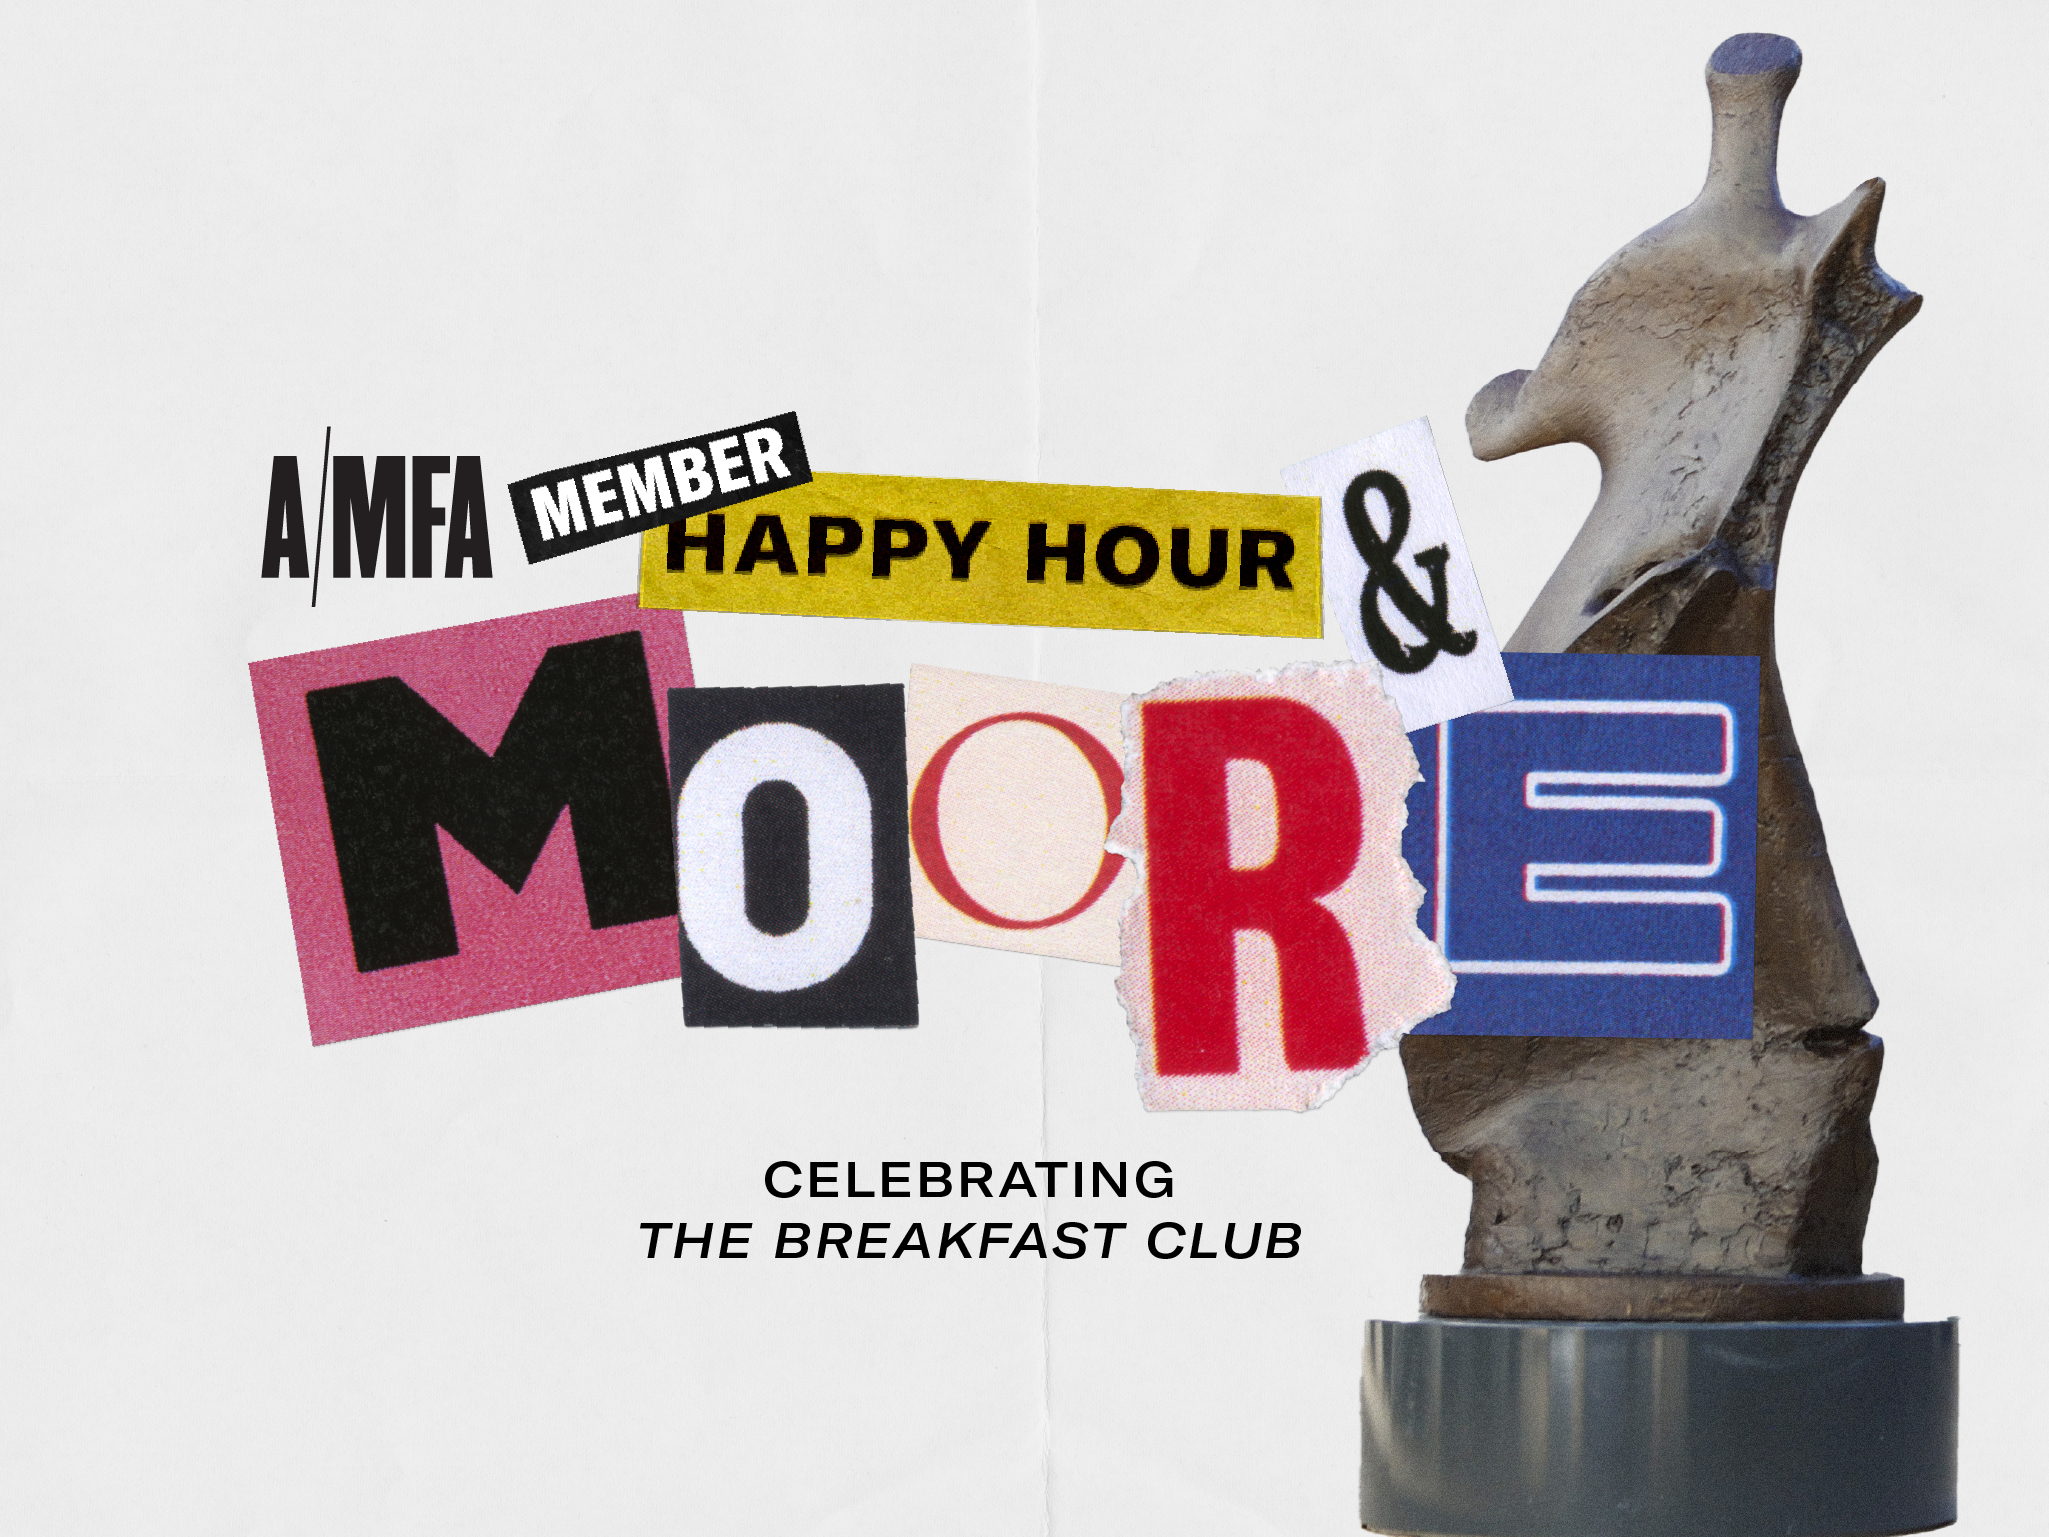 Graphic with the words AMFA member happy hour and moore celebrating the breakfast club next to a photo of a bronze sculpture by Henry Moore.